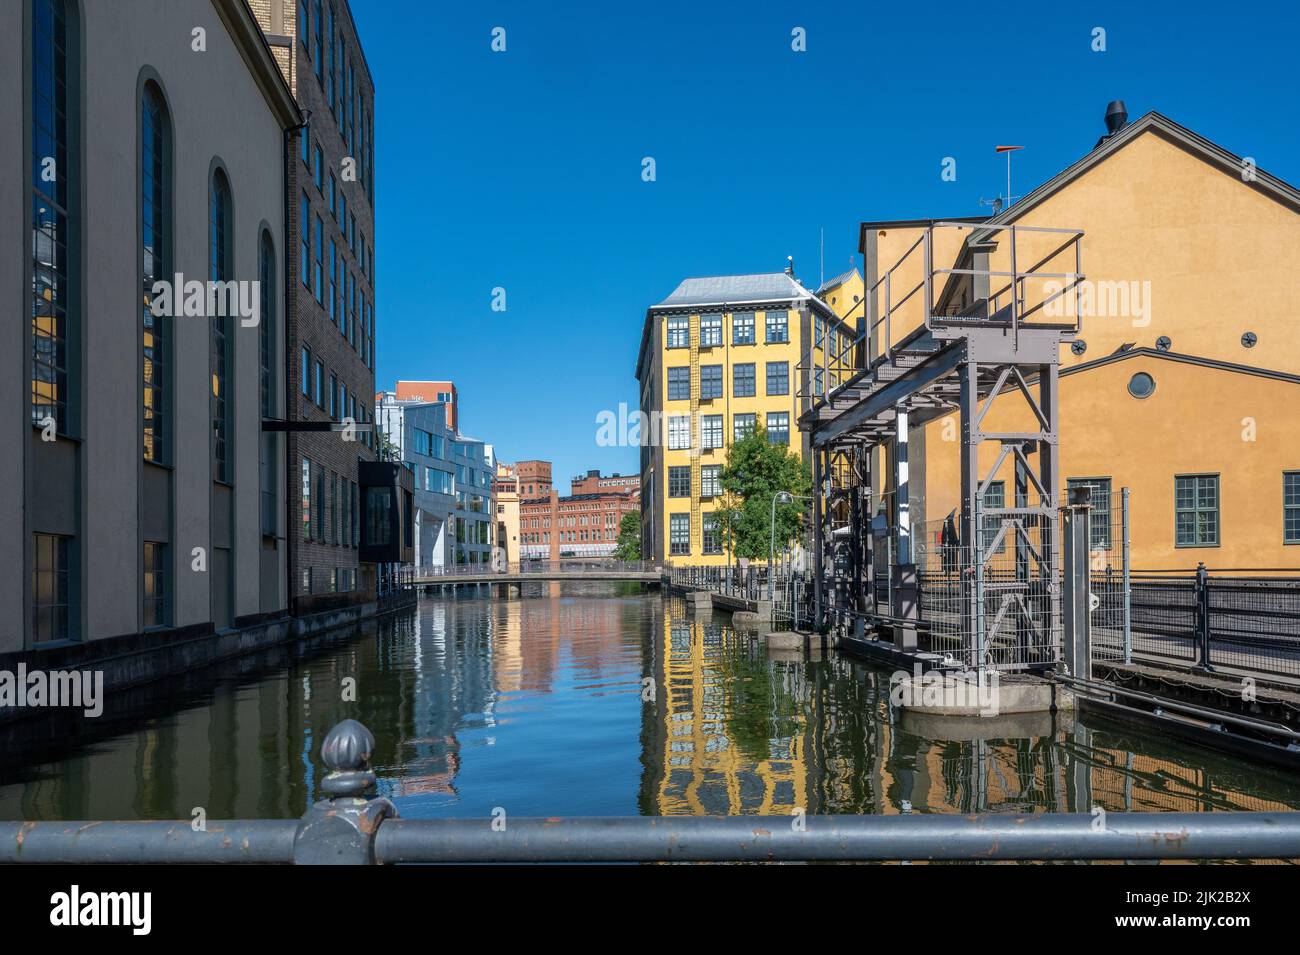 The old industrial landscape in Norrkoping. Norrkoping is a historic industrial town in Sweden. Stock Photo